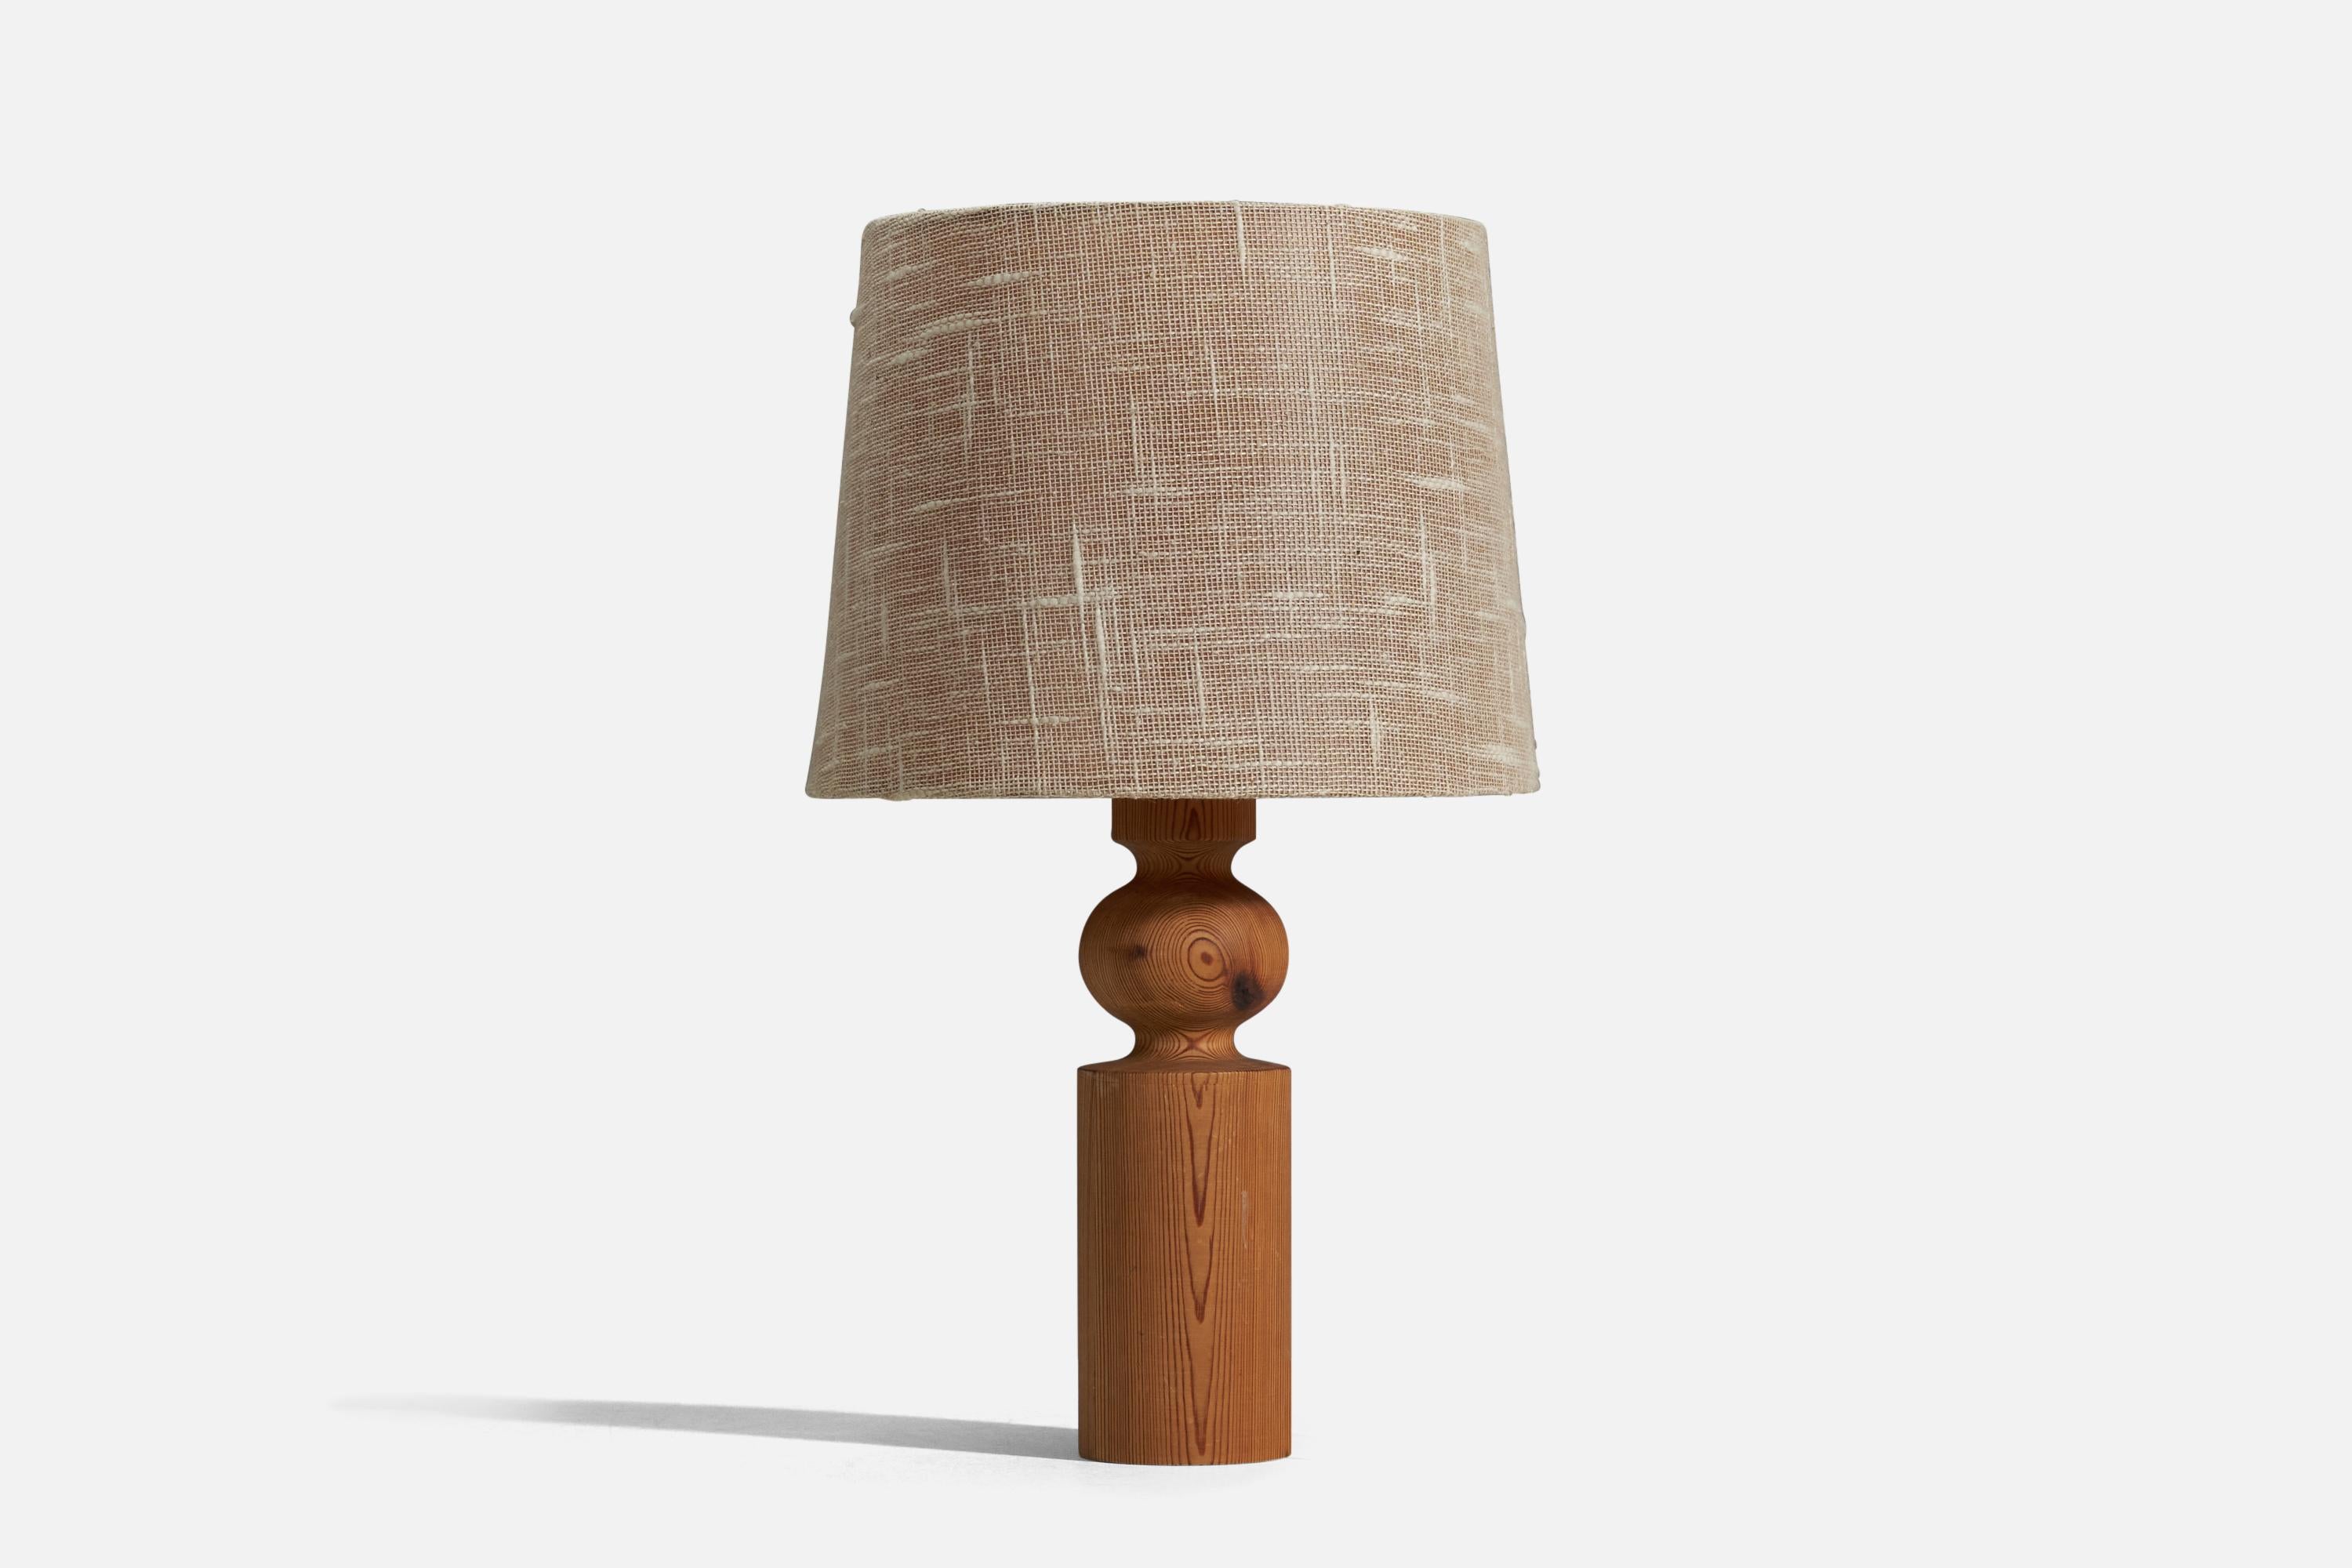 A solid pine and beige fabric table lamp designed by Uno Kristiansson and produced by Luxus, Sweden, 1960s.

Sold with original Lampshade mounted on original acrylic diffuser. Dimensions stated are of Table Lamp with Lampshade. 

Socket takes